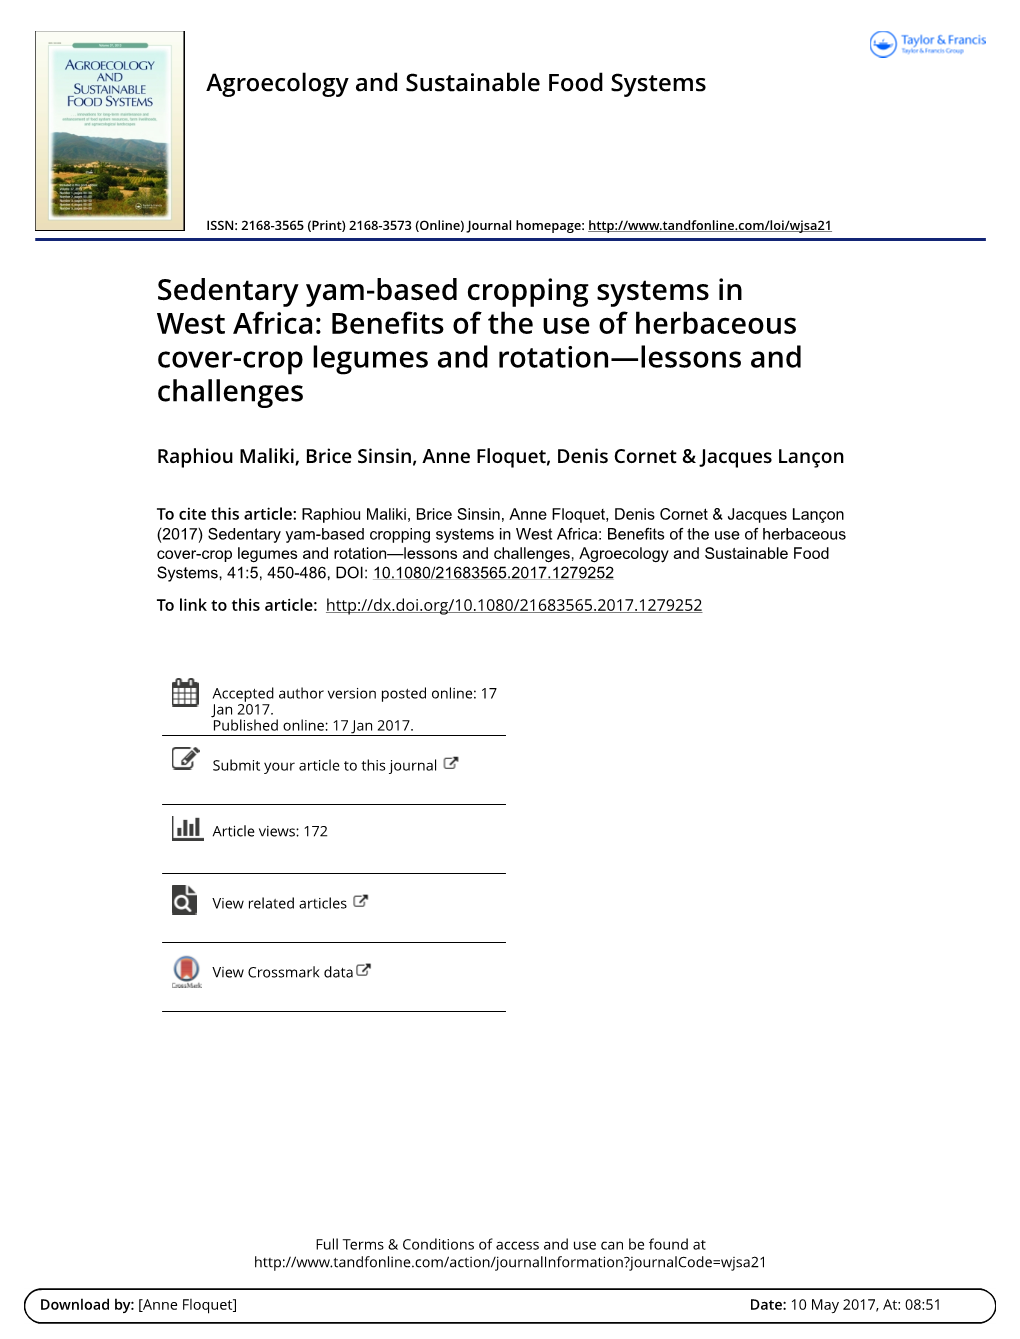 Sedentary Yam-Based Cropping Systems in West Africa: Benefits of the Use of Herbaceous Cover-Crop Legumes and Rotation—Lessons and Challenges